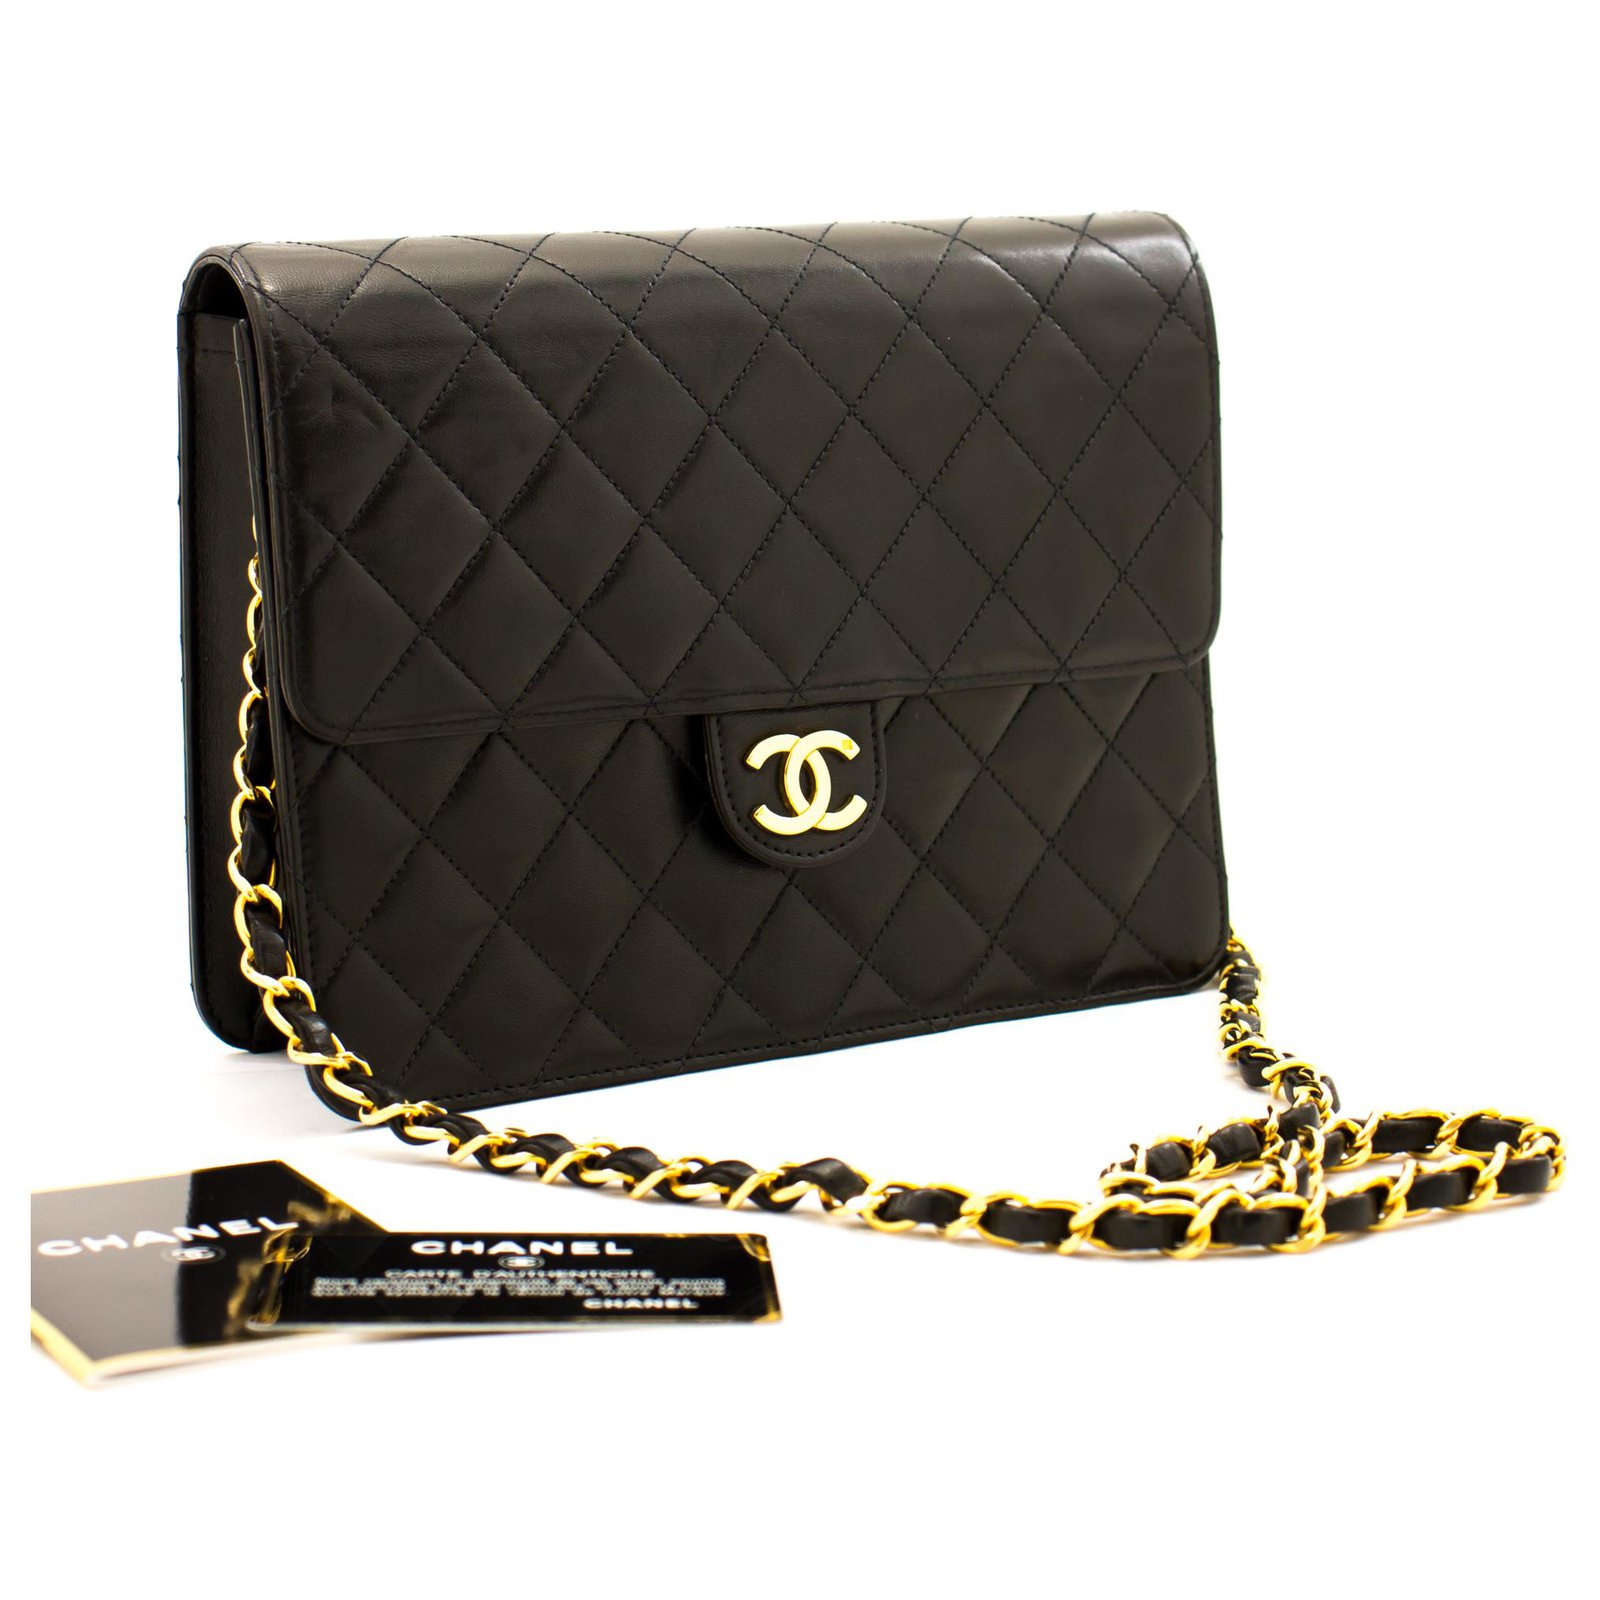 Chanel Black Lambskin Quilted Citizen Small Flap Chain Bag